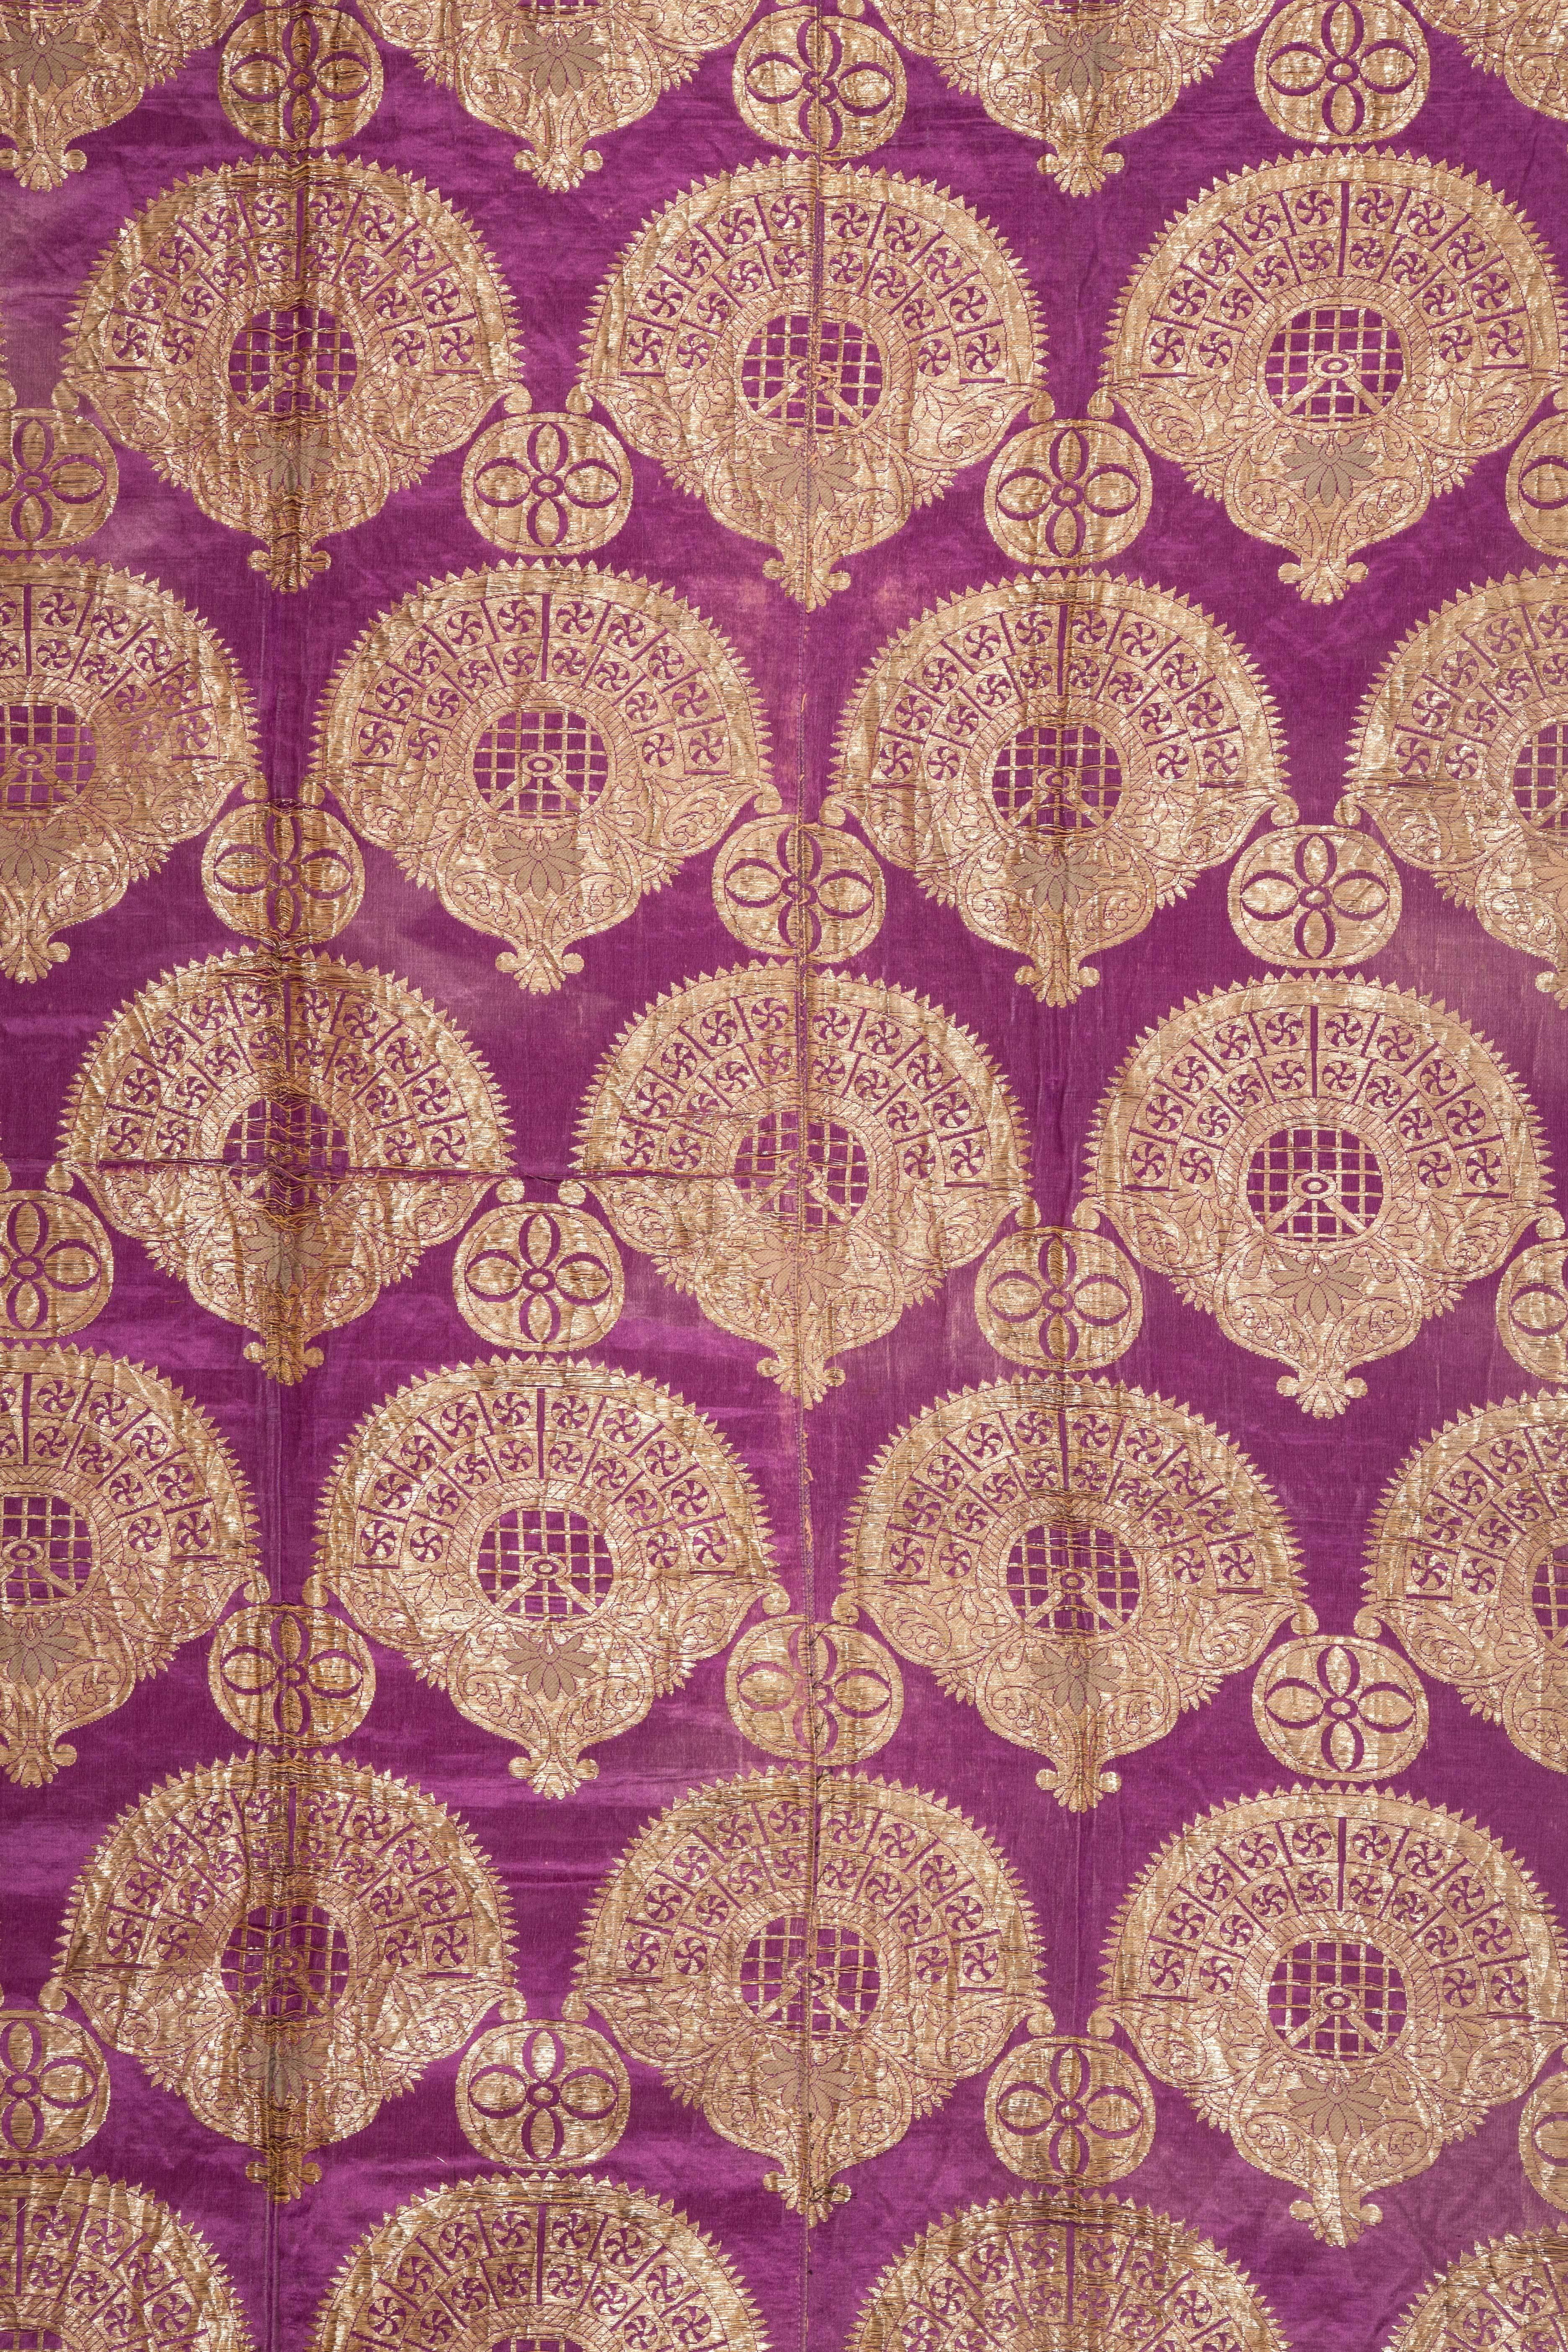 These type of brocades were usually made for Central Asian market to make chapans and wall hangings.